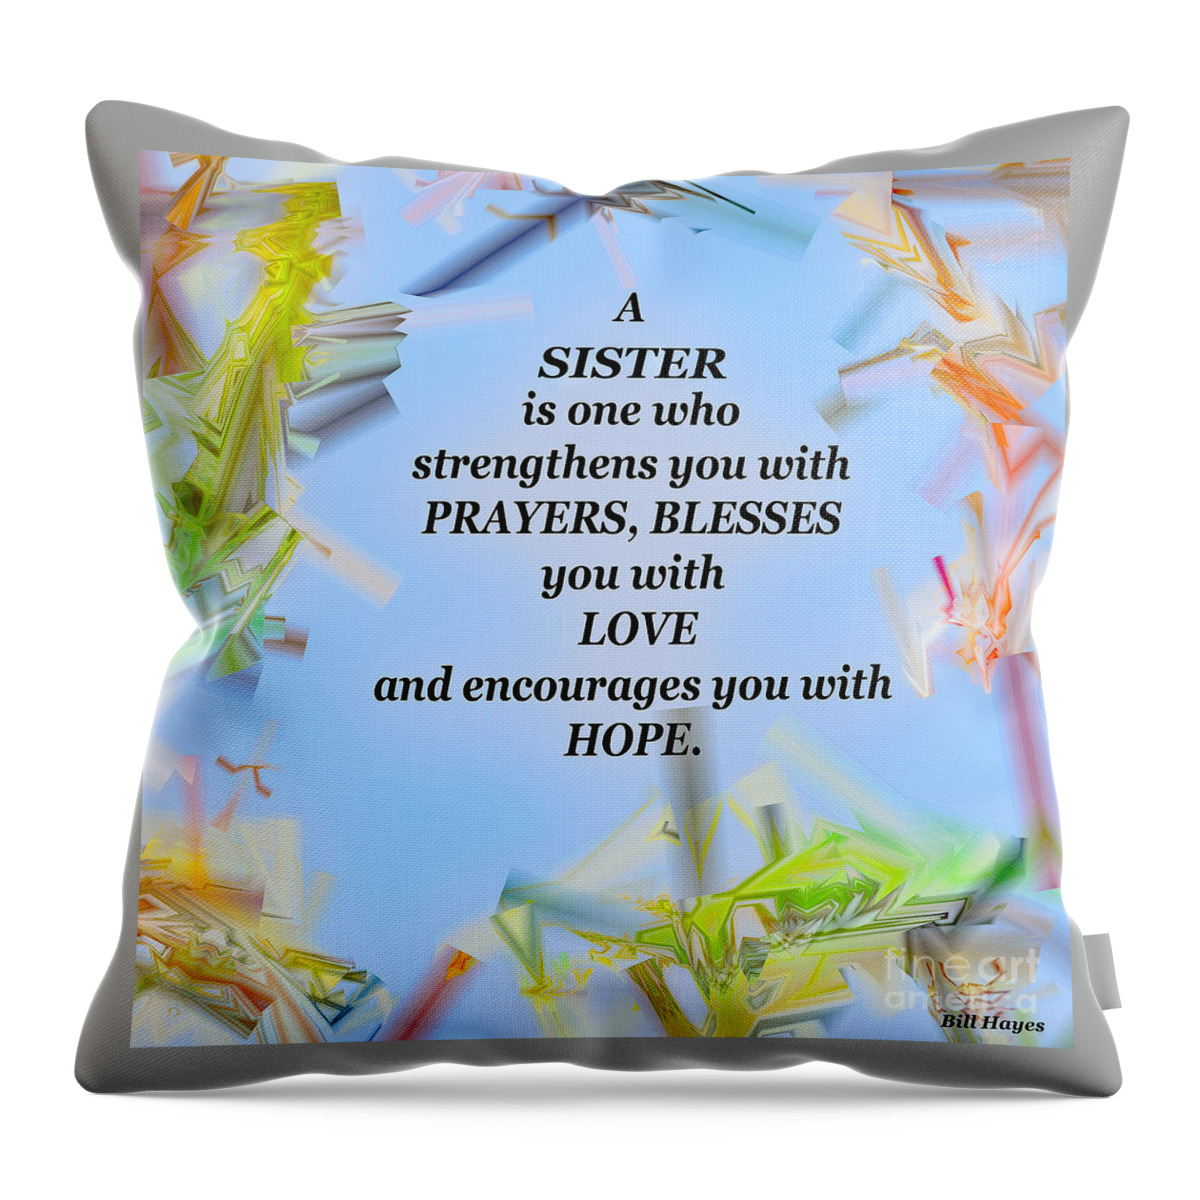 Abstracts Throw Pillow featuring the digital art A Sister - Signed Digital Art by DB Hayes